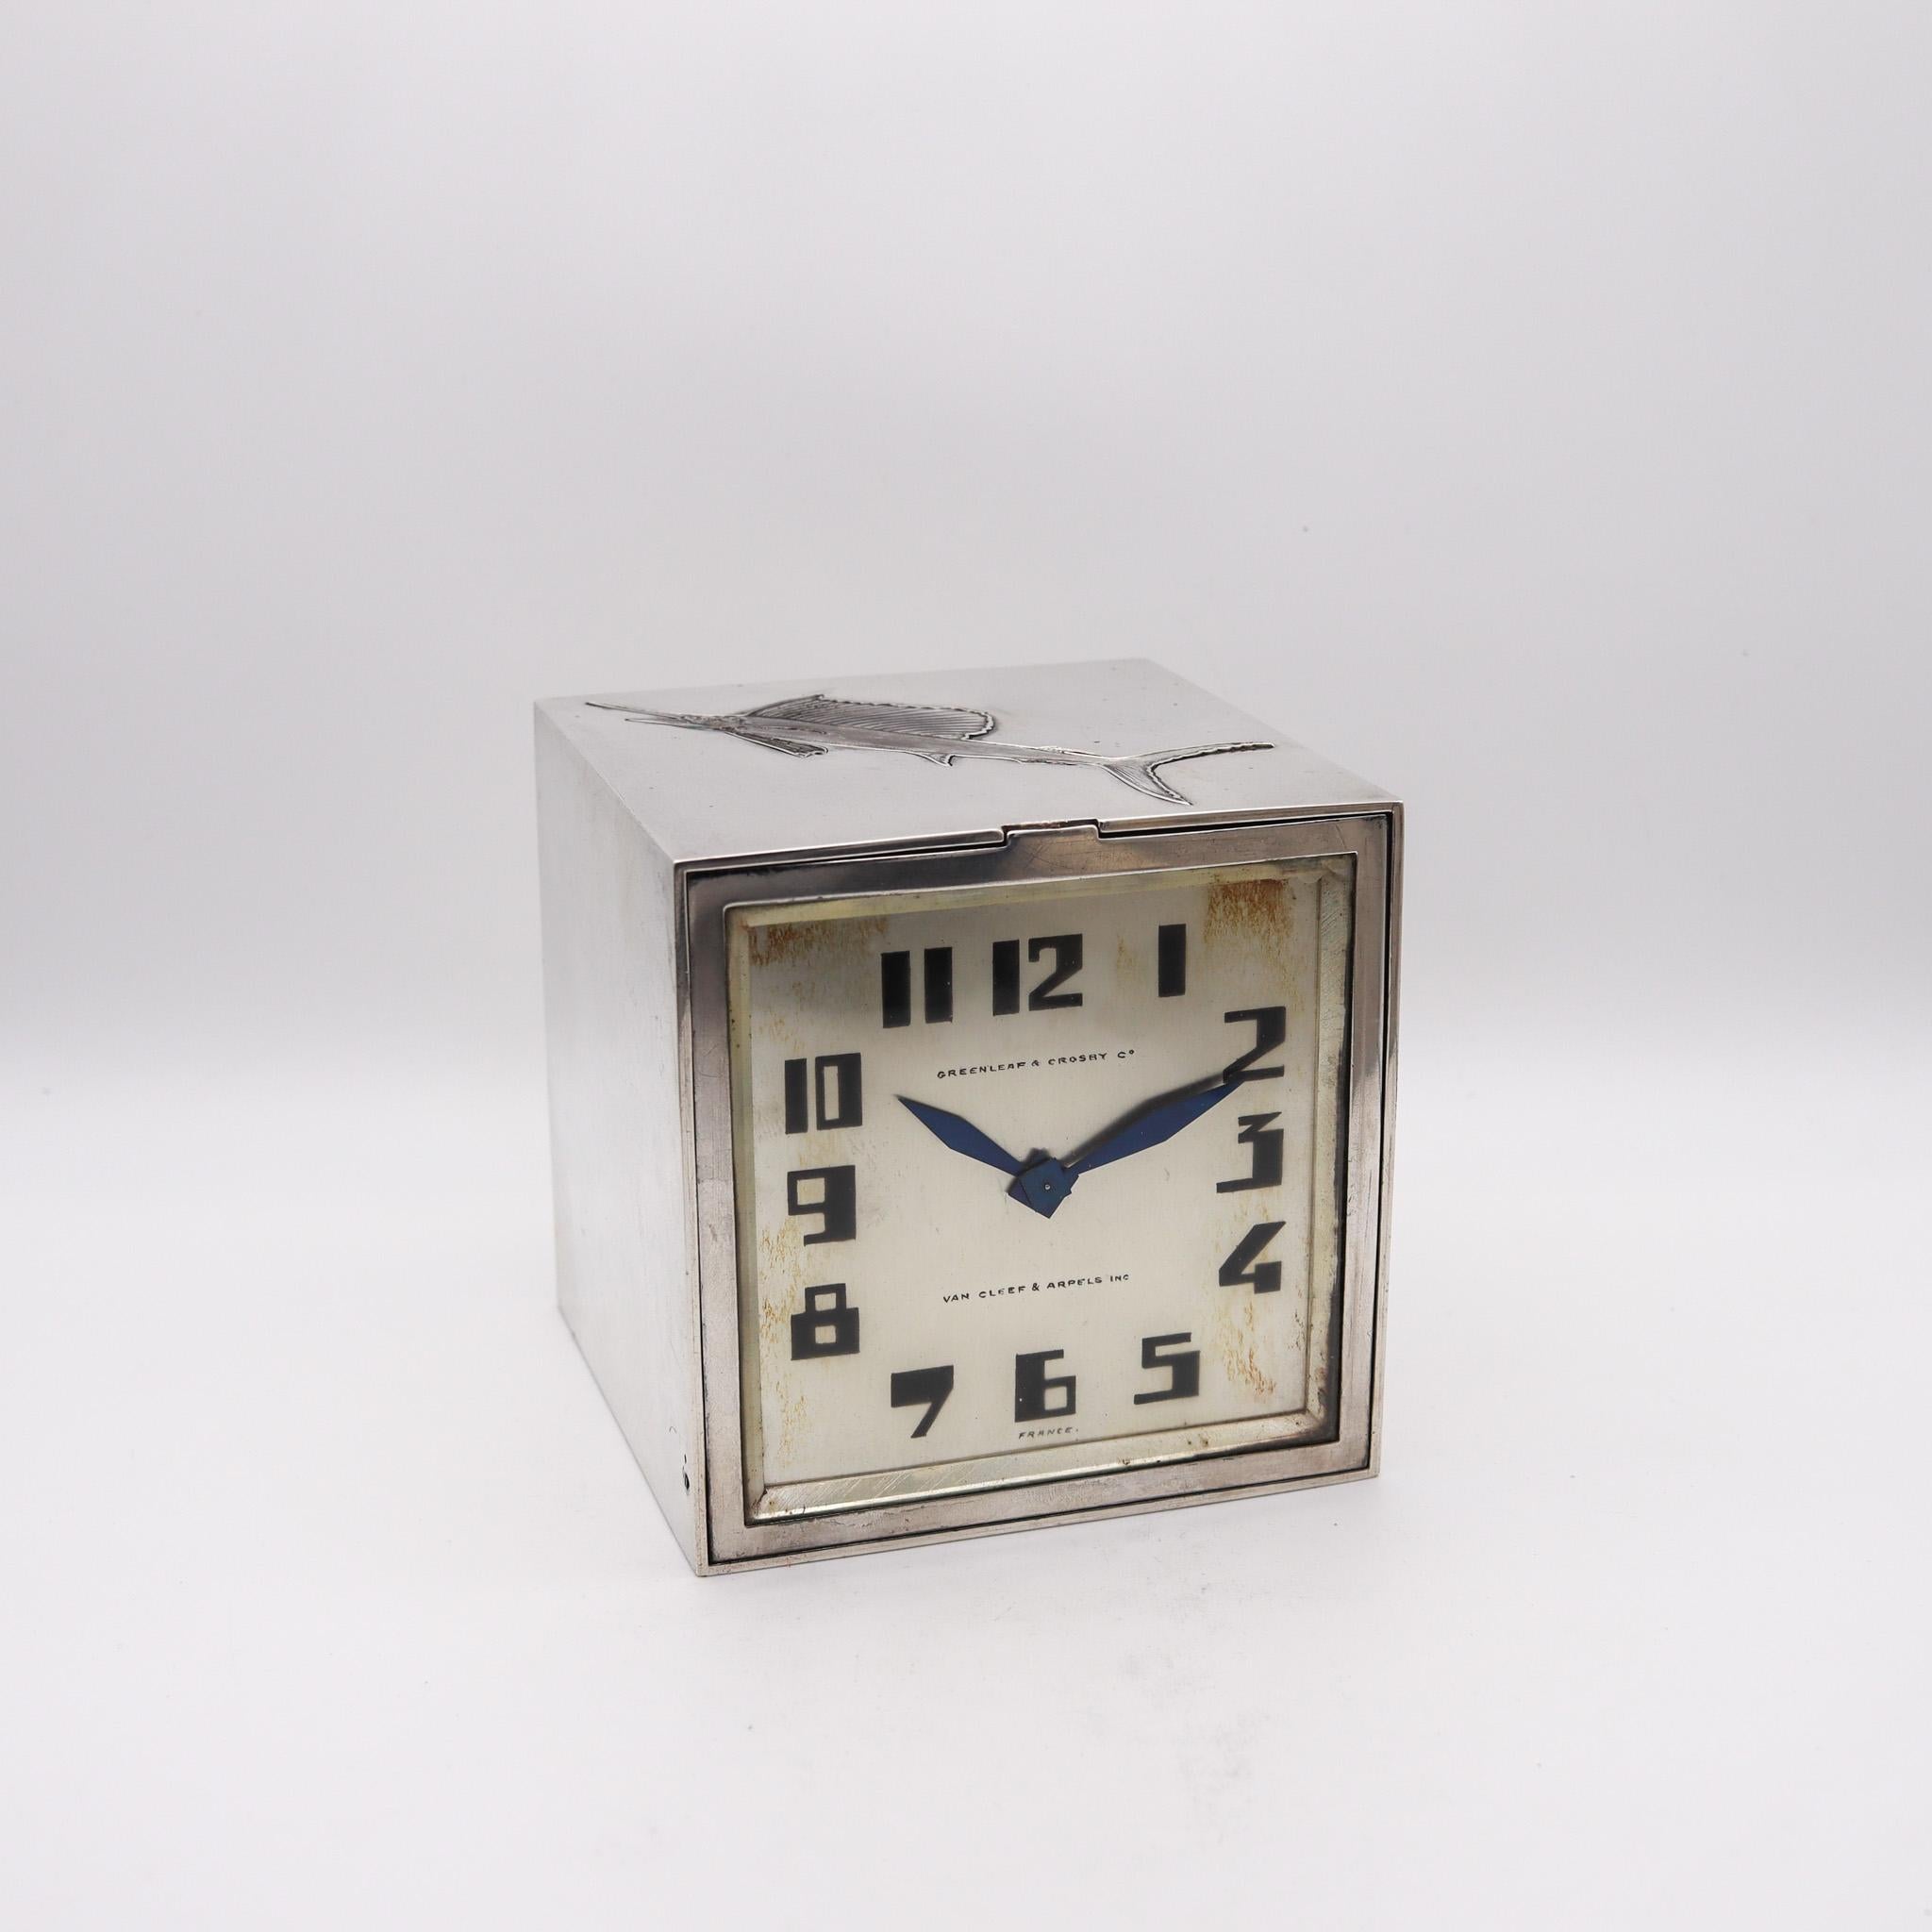 An art deco mechanical box clock designed by Van Cleef & Arpels.

This is an extremely rare multifunctional desk piece, created in Paris France during the art deco period by the jewelry house of Van Cleef & Arpels back in the 1930's. This amazing